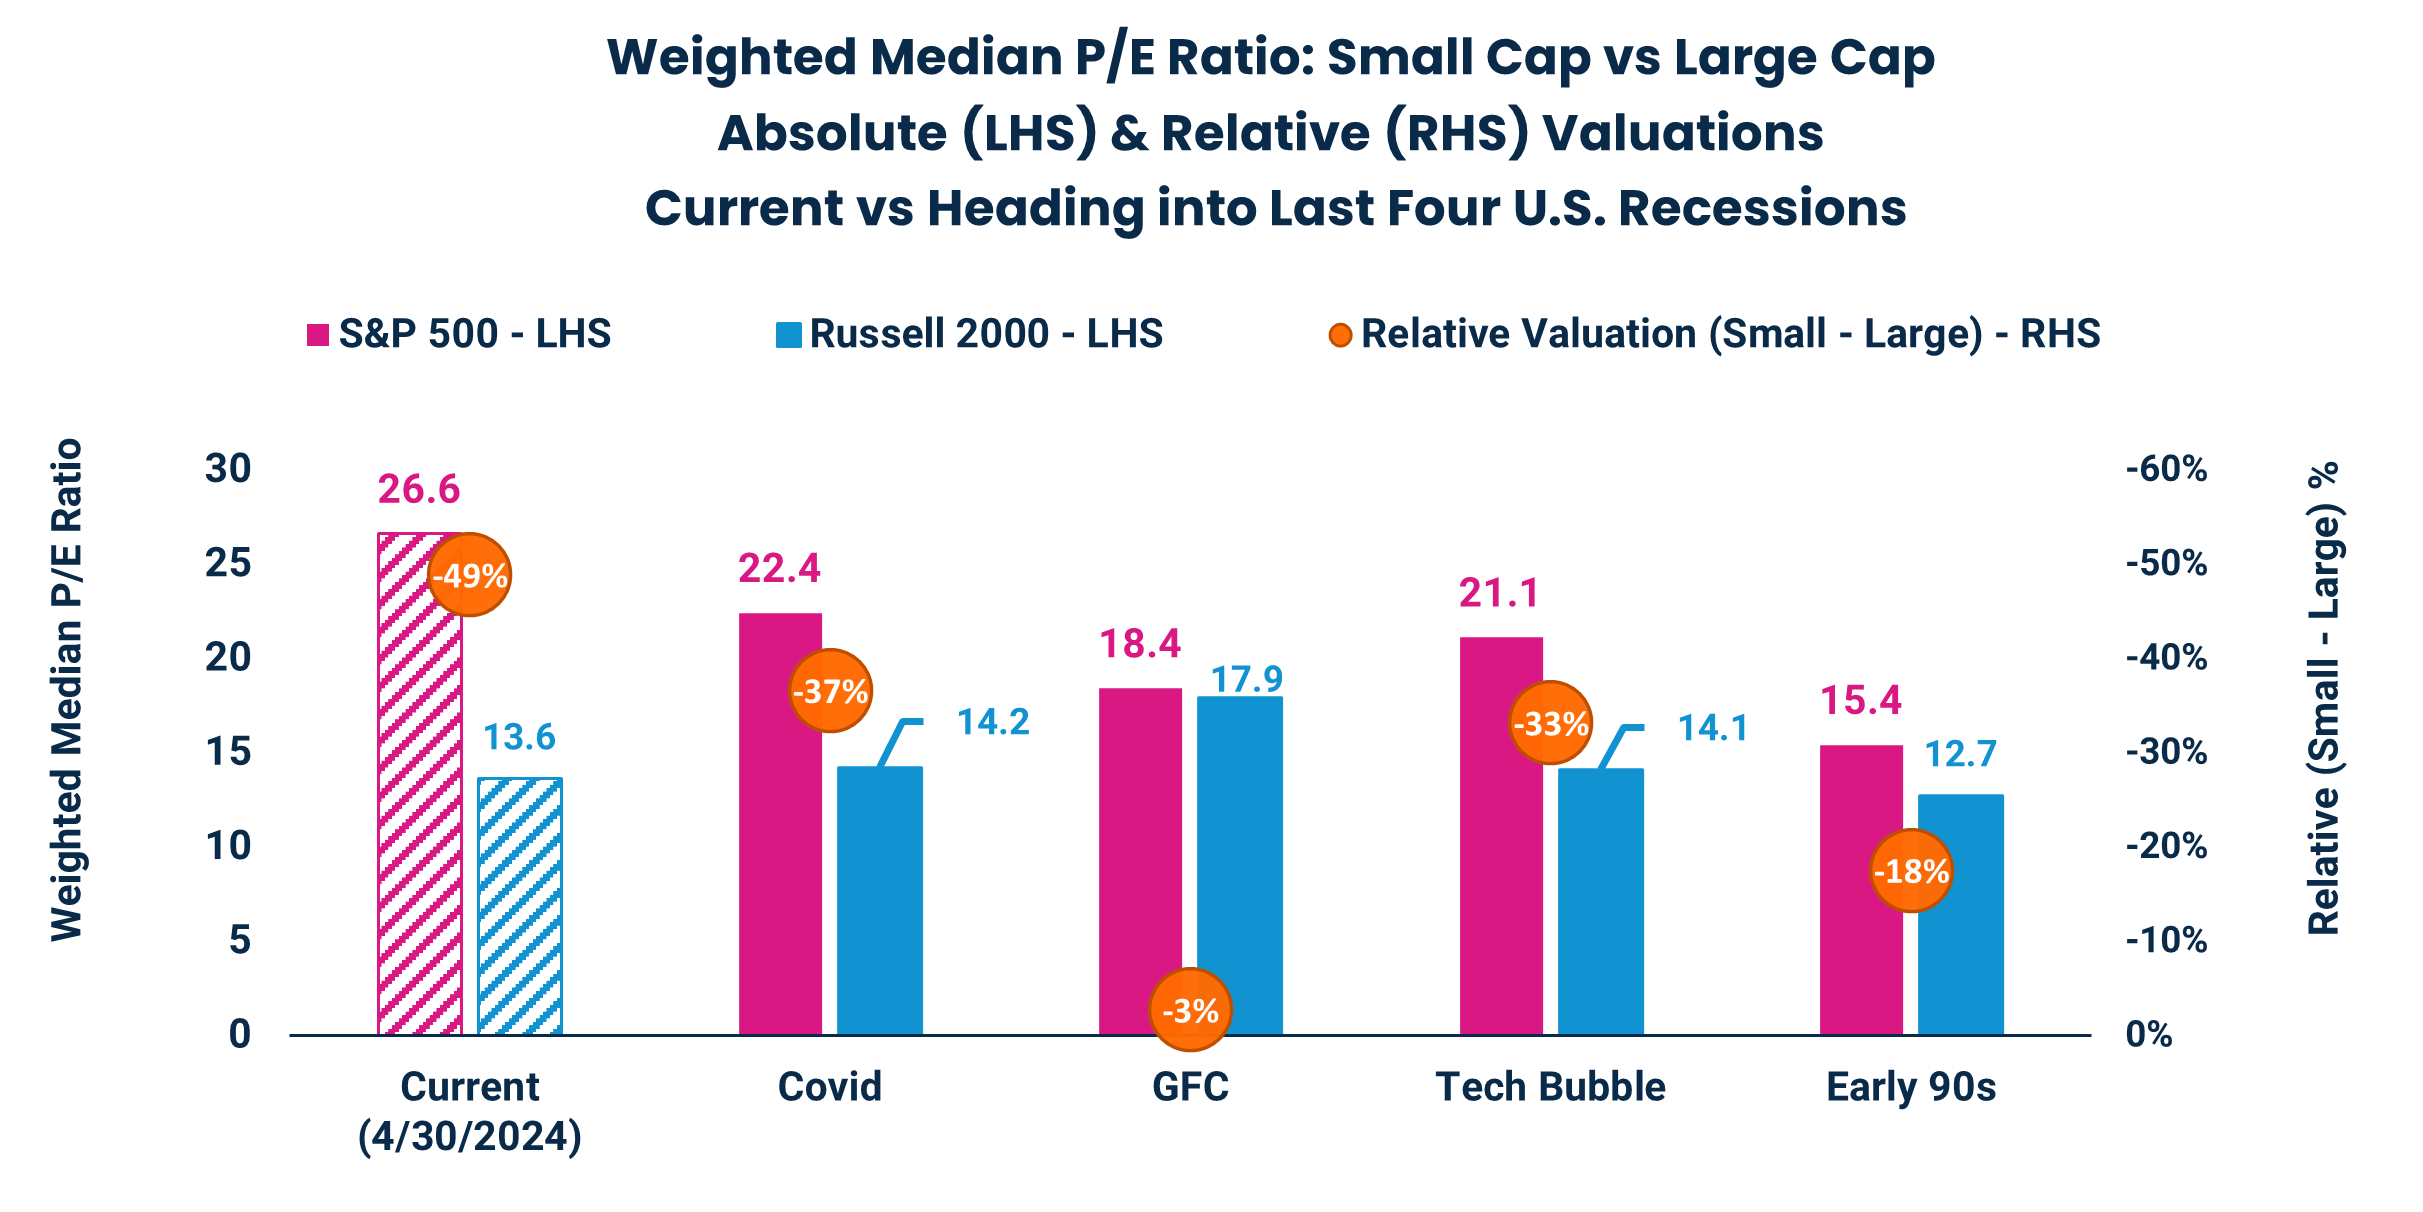 Weighted Median P/E Ratio: Small Cap vs Large Cap
Absolute (LHS) & Relative (RHS) Valuations
Current vs Heading into Last Four U.S. Recessions